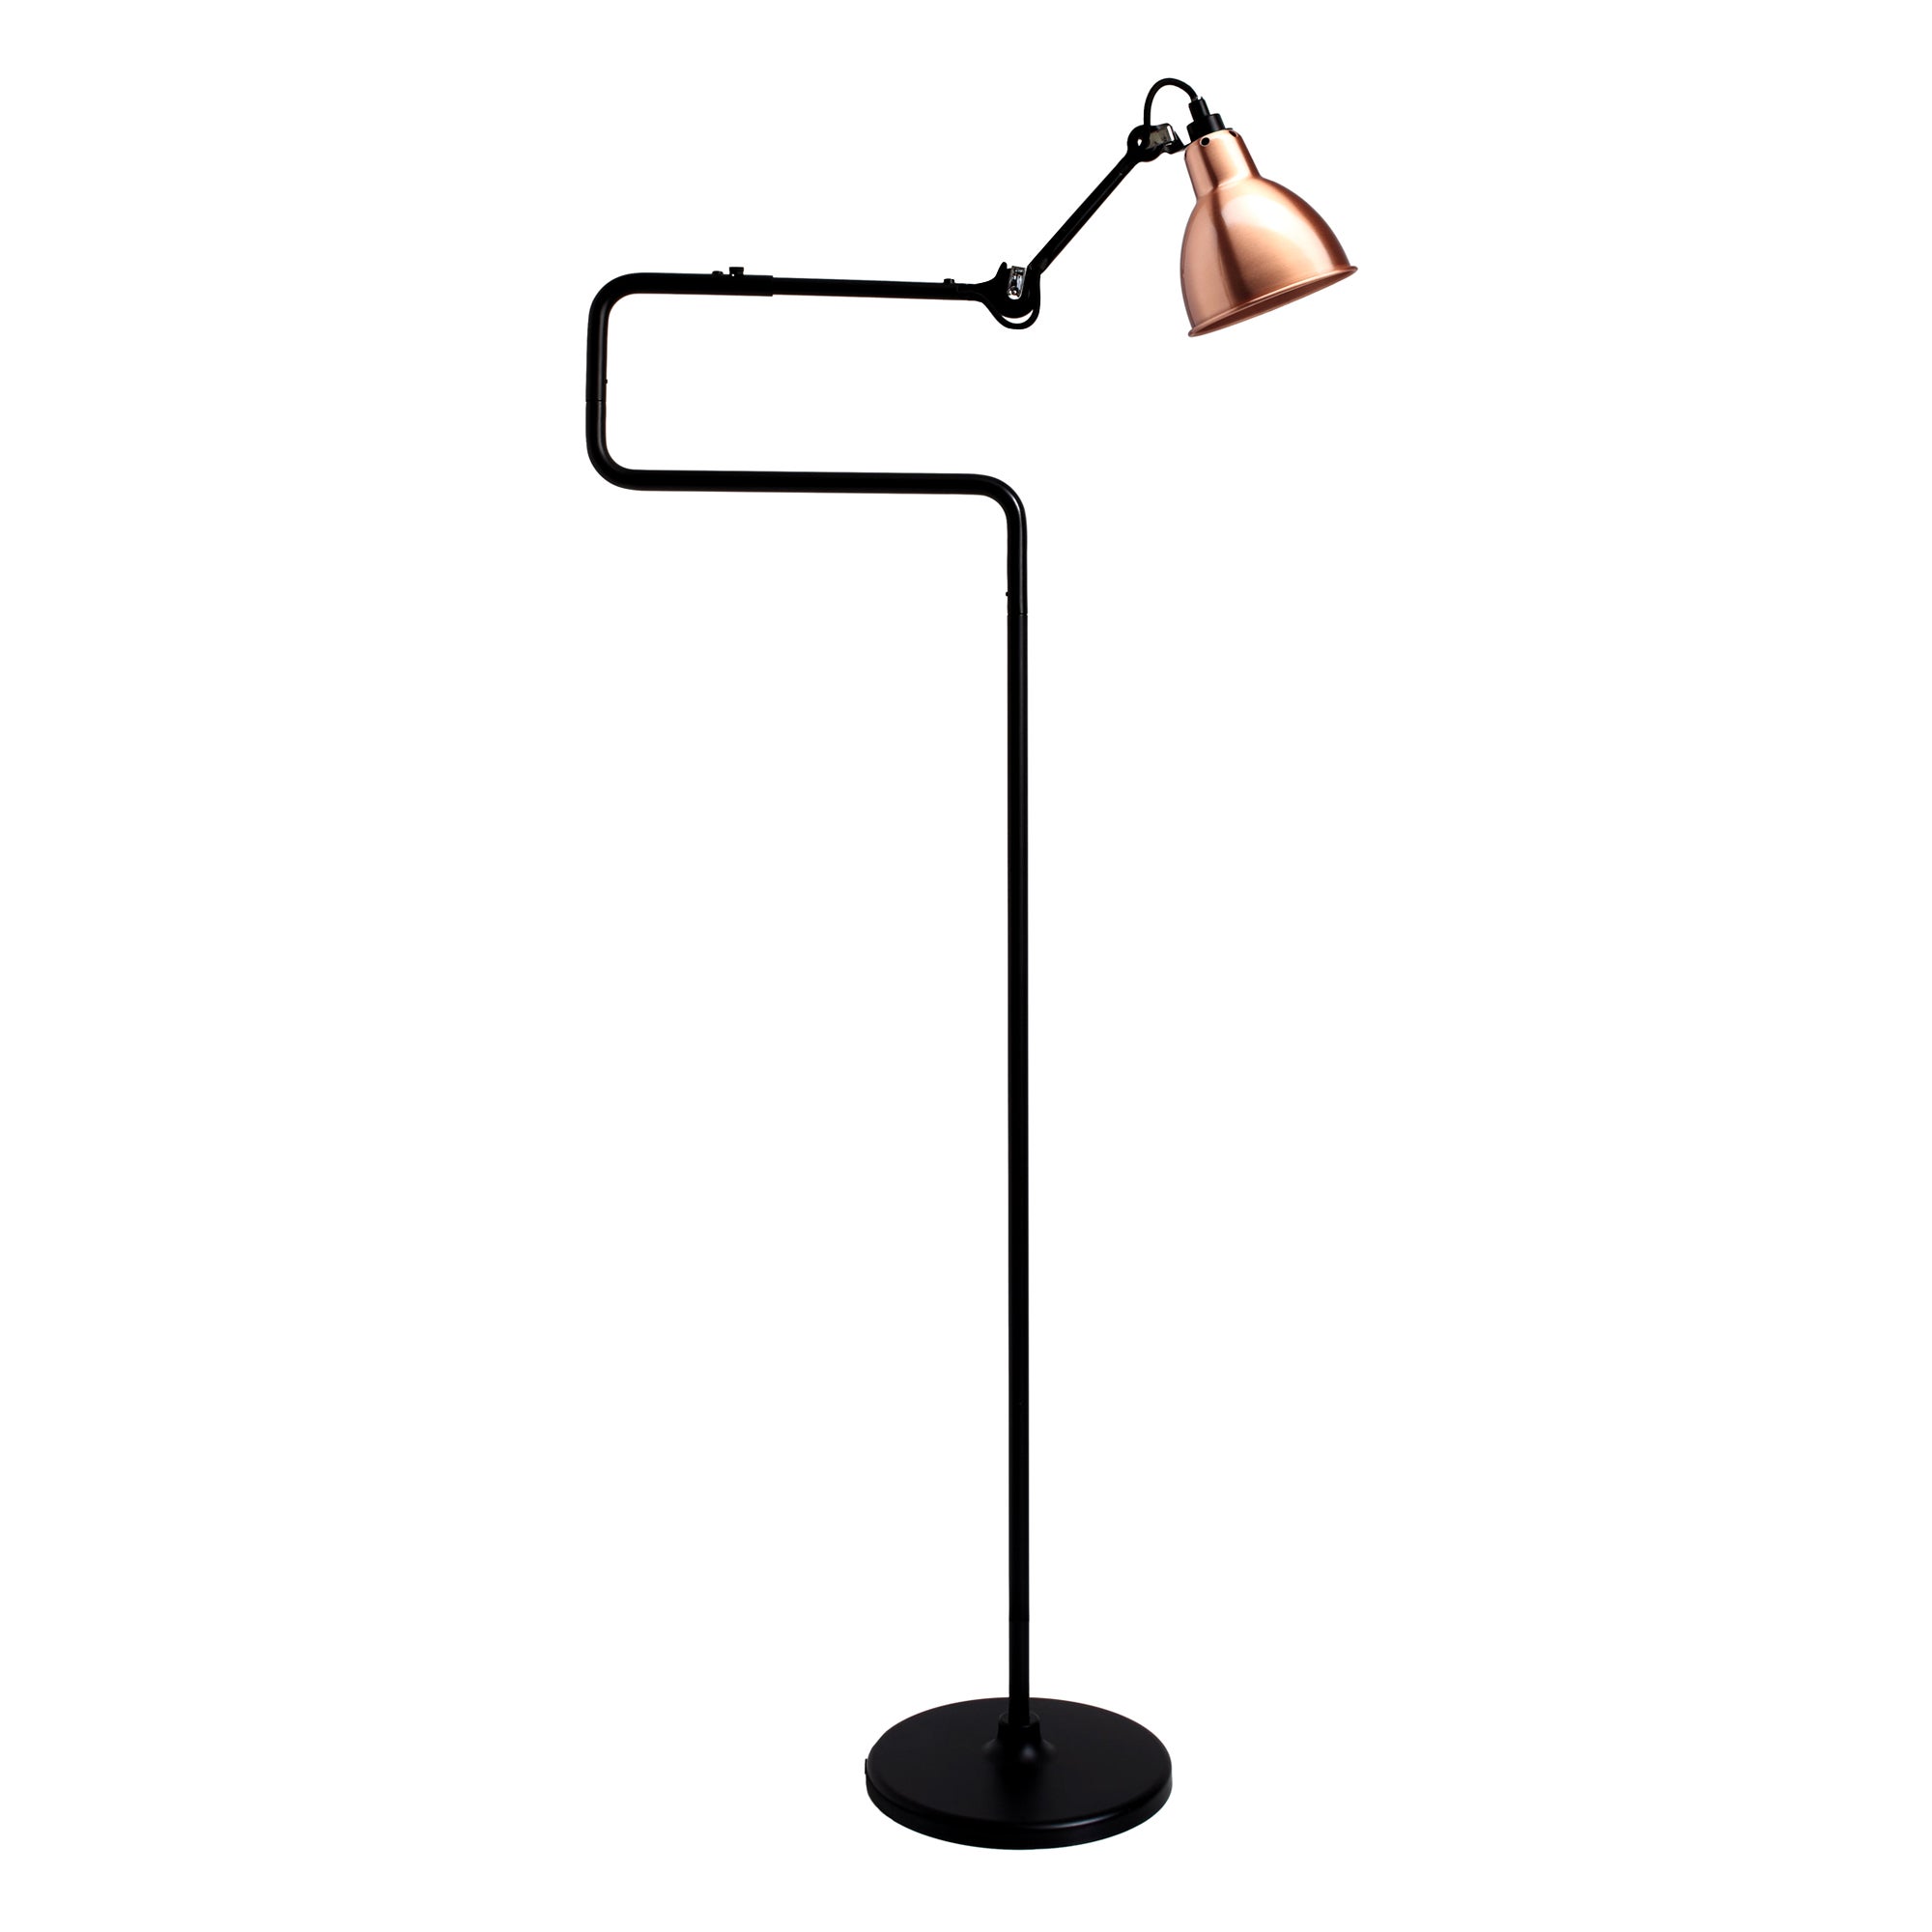 DCW Editions La Lampe Gras N°411 Floor Lamp in Black Arm and Copper Shade